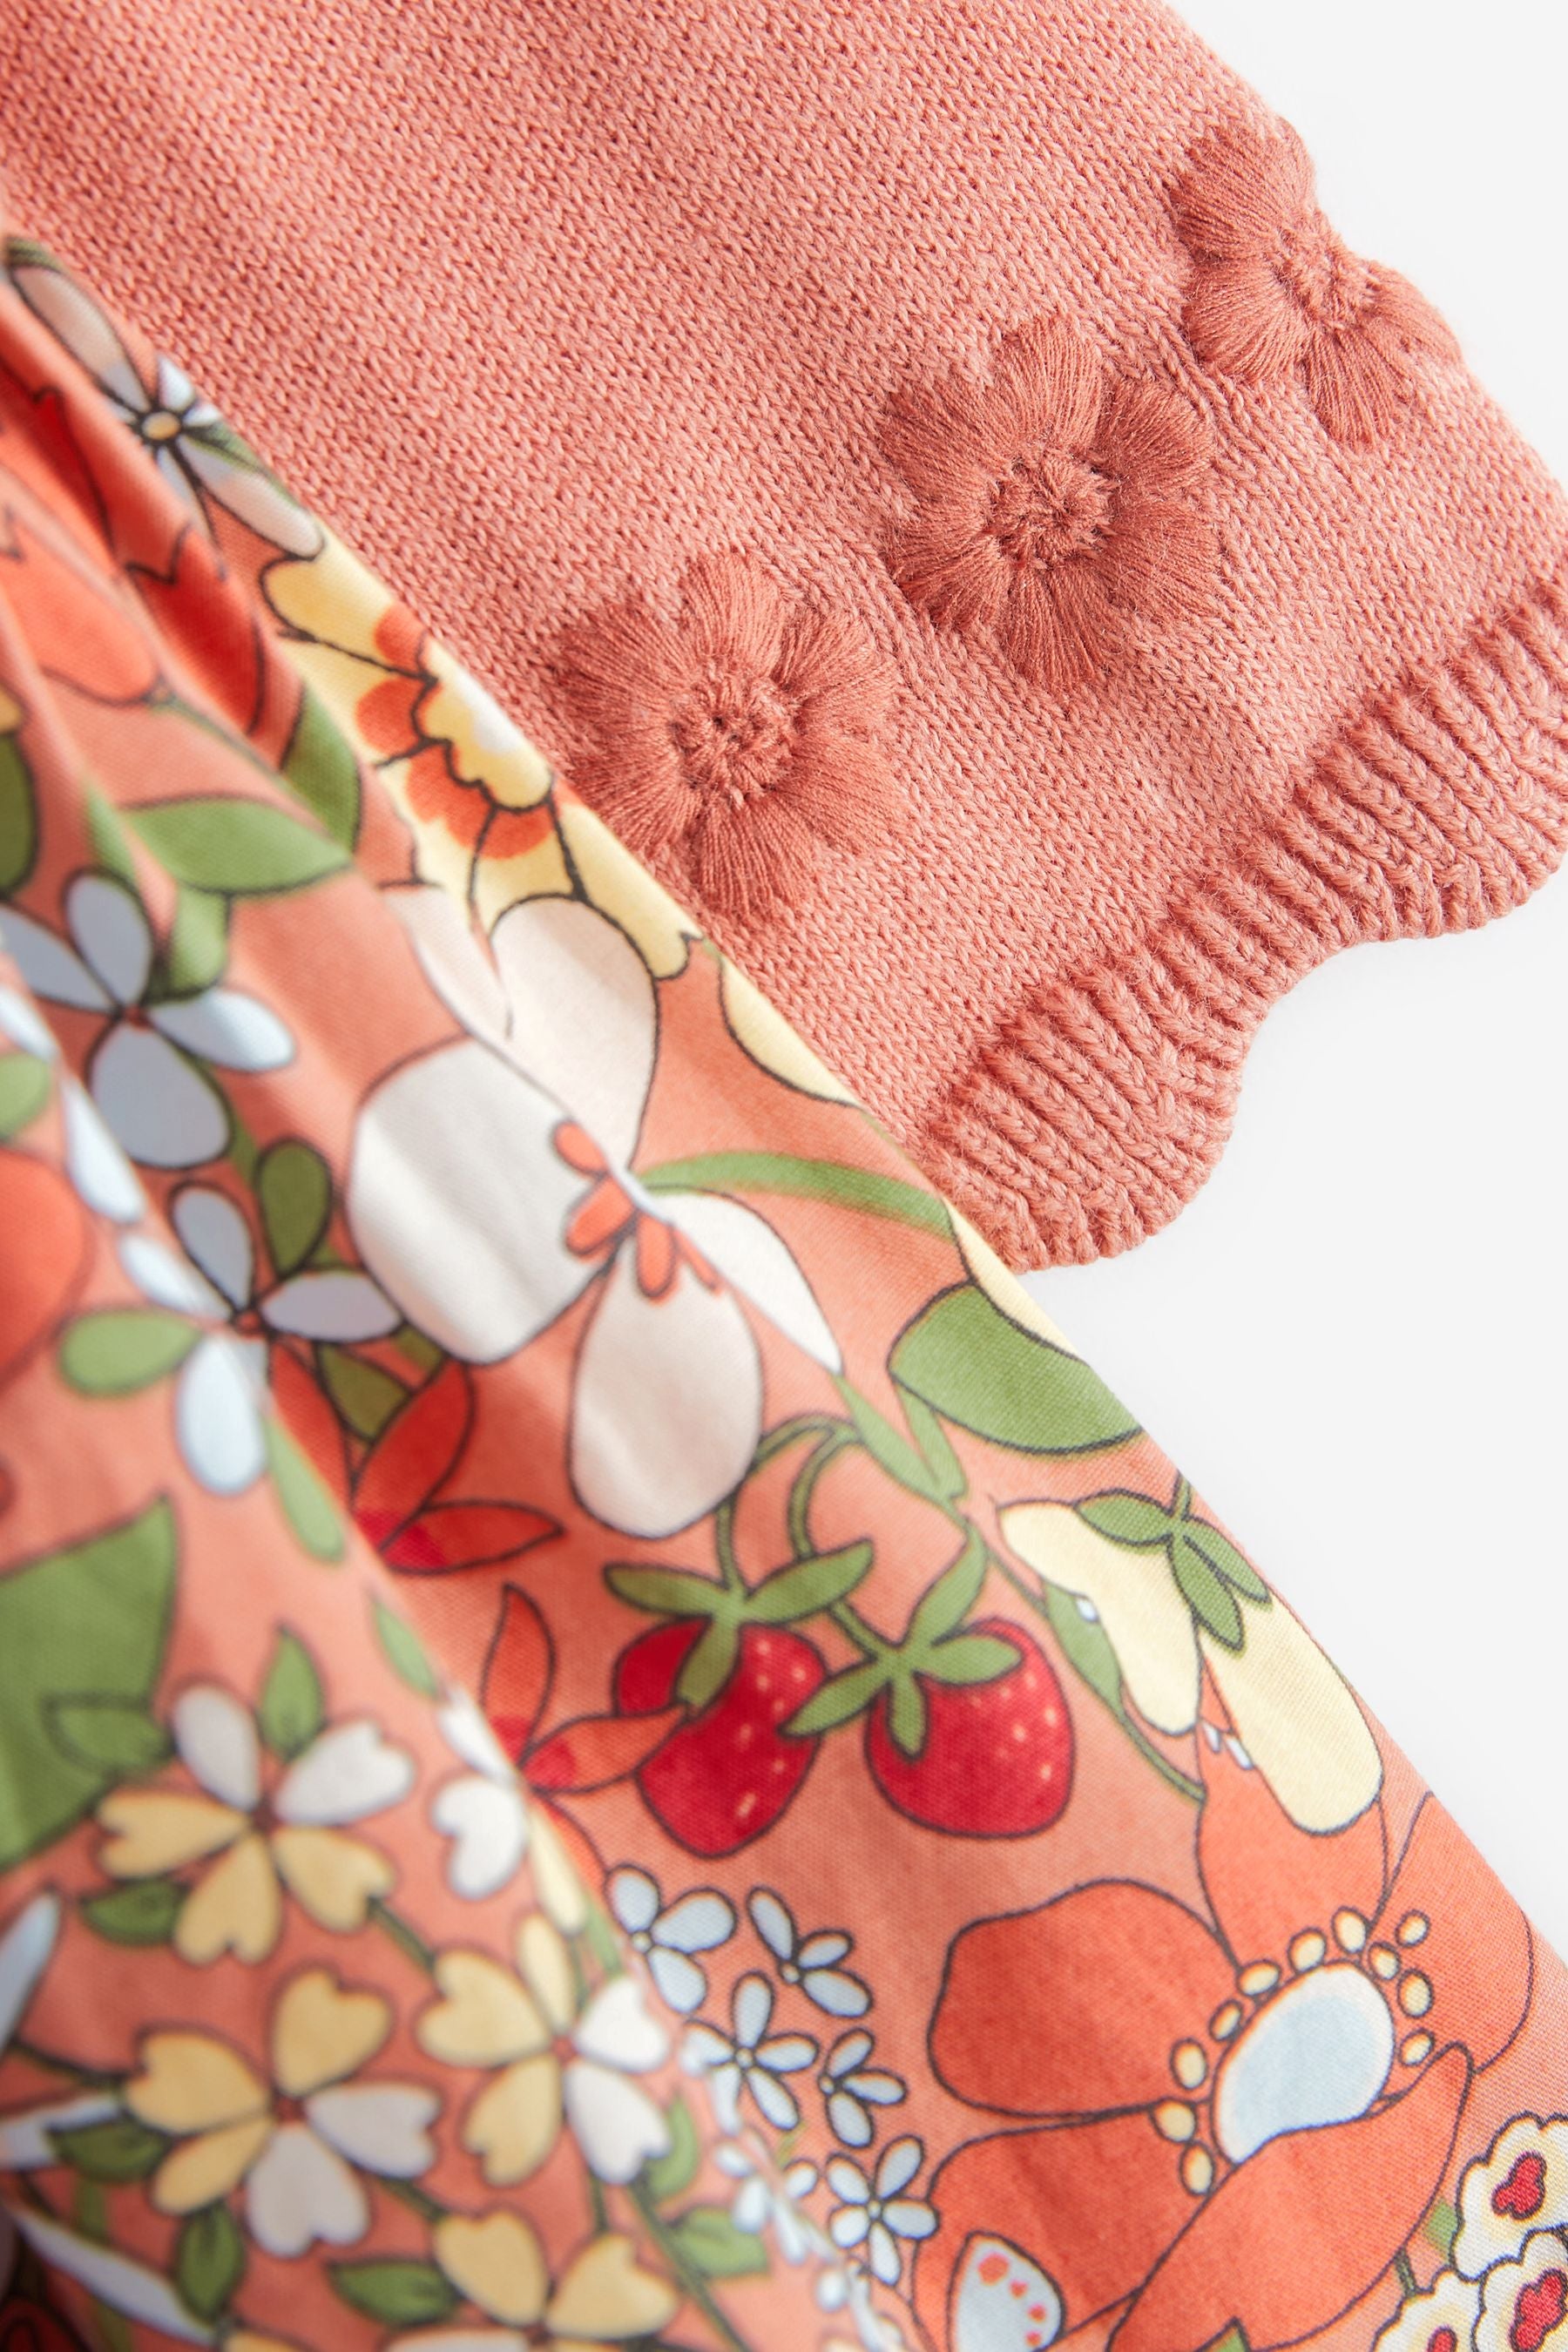 Rust Brown Baby Floral Occasion Dress, Cardigan And Knicker Set (0mths-2yrs)